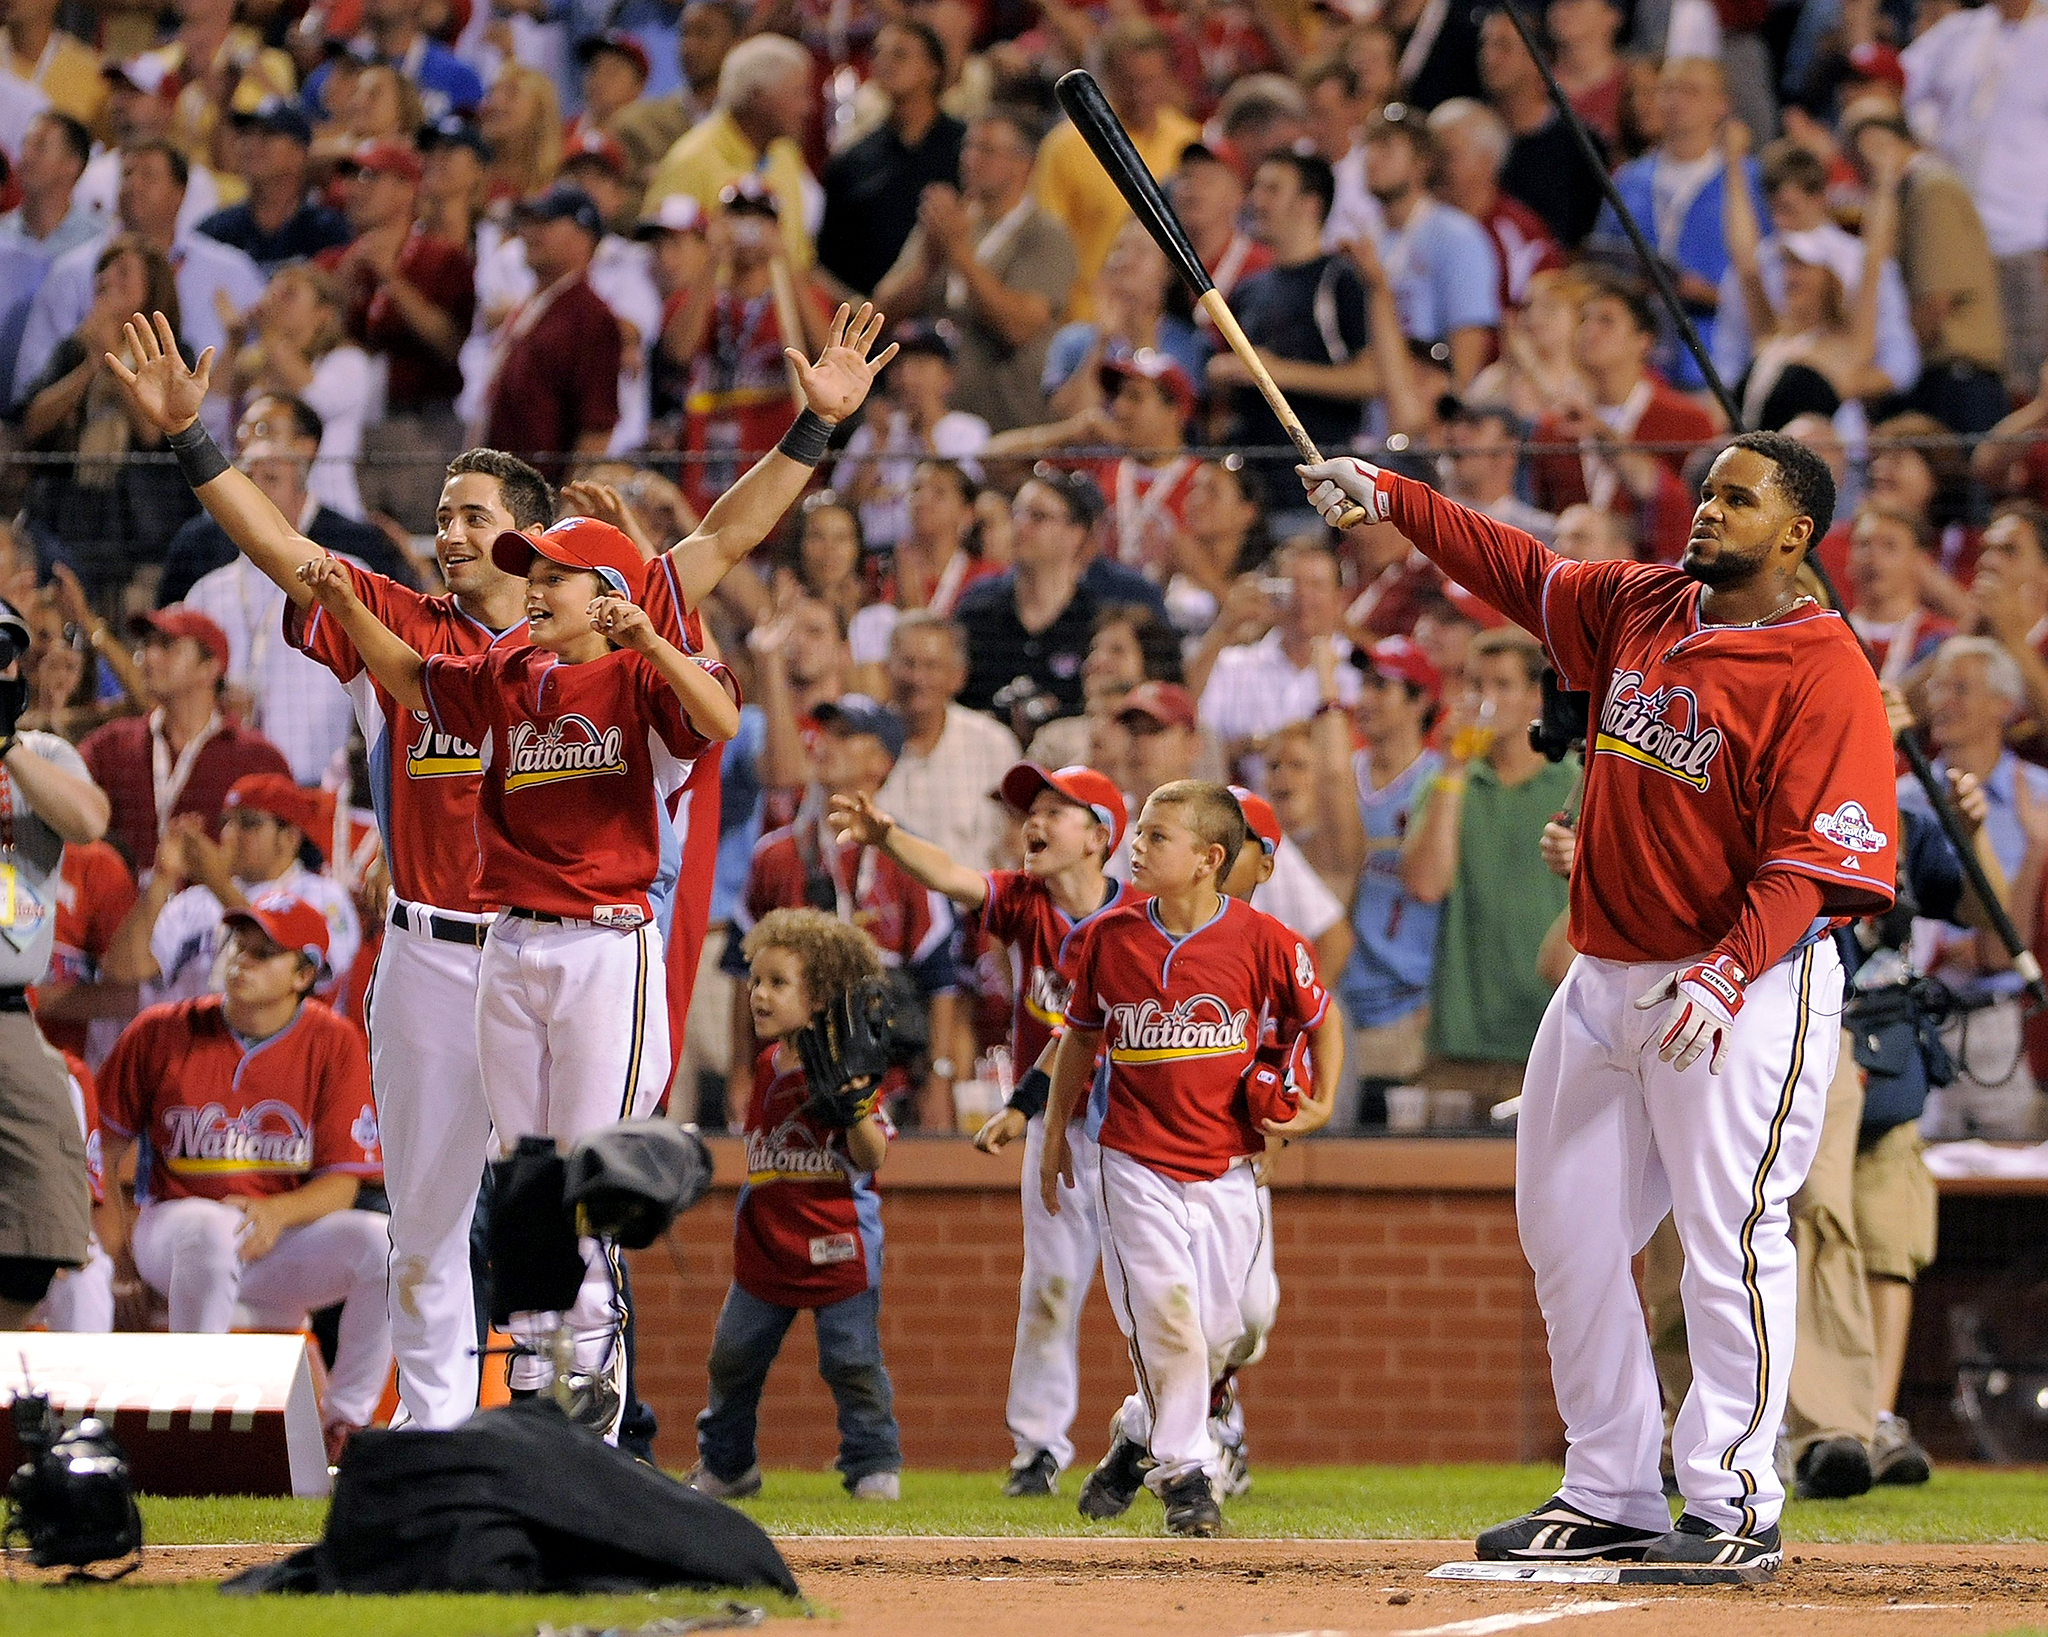 Home Run Derby History – For Players and Fans